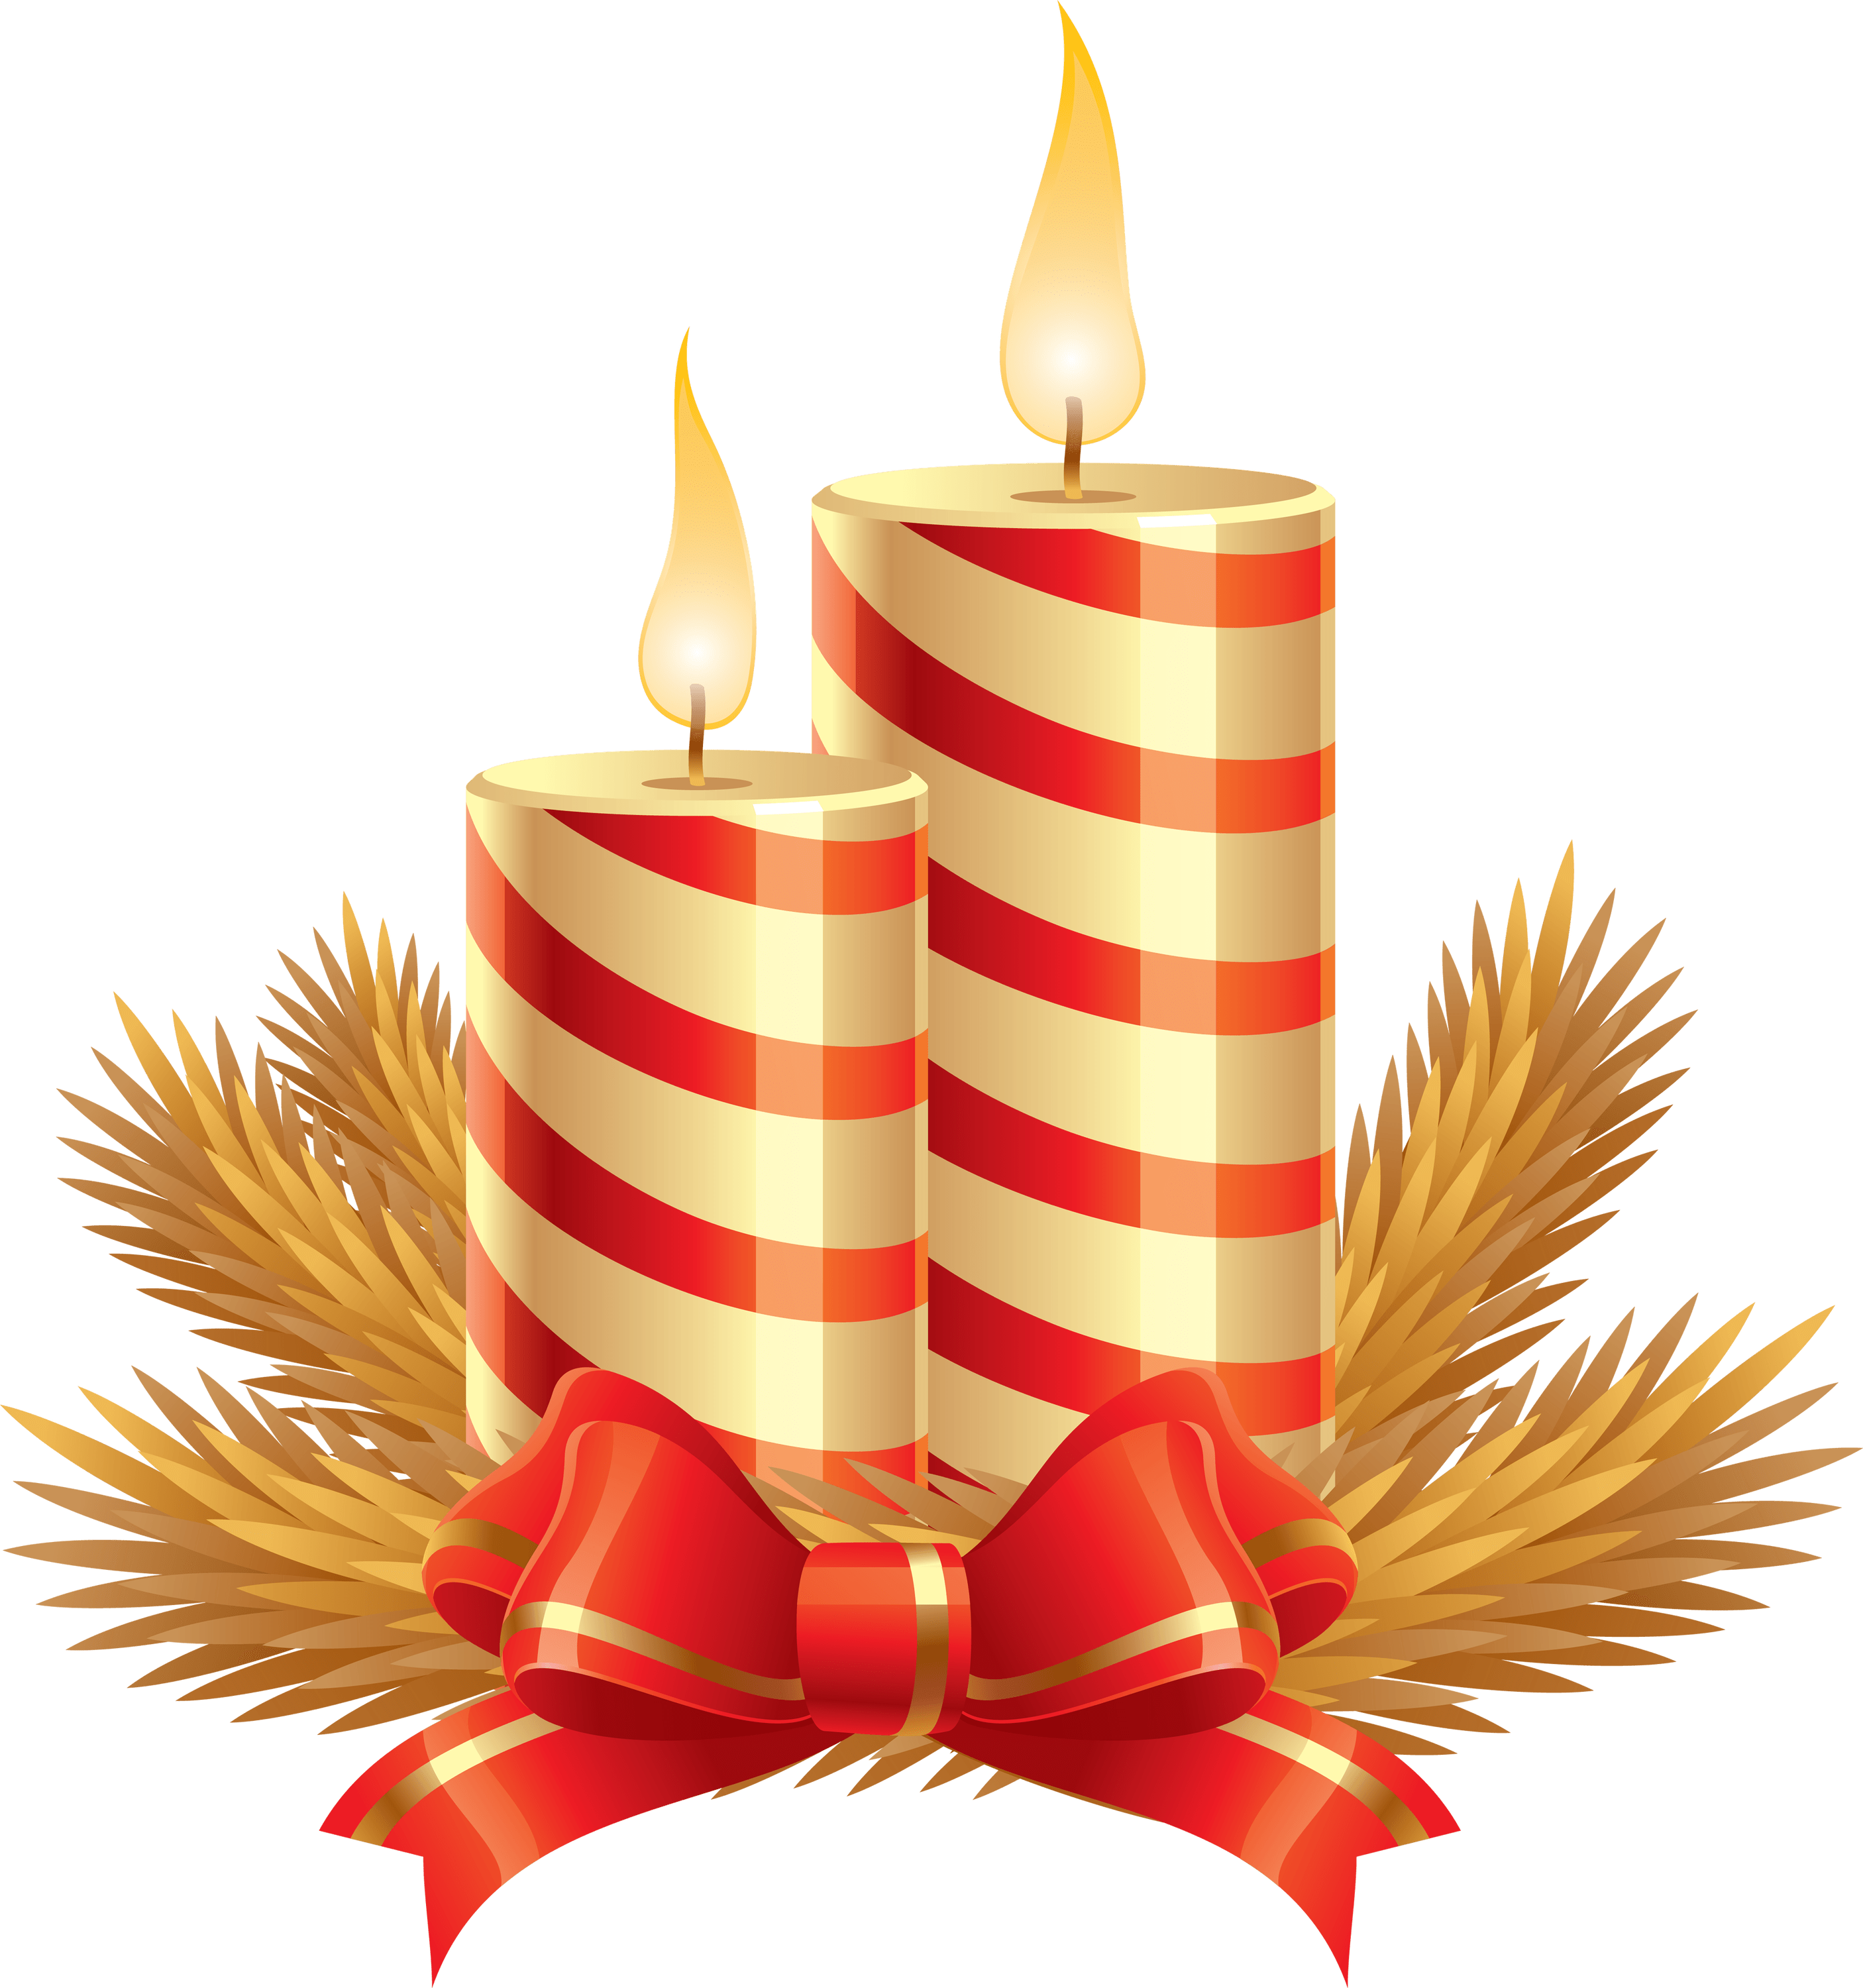 Church Candles Decoration PNG HD Quality